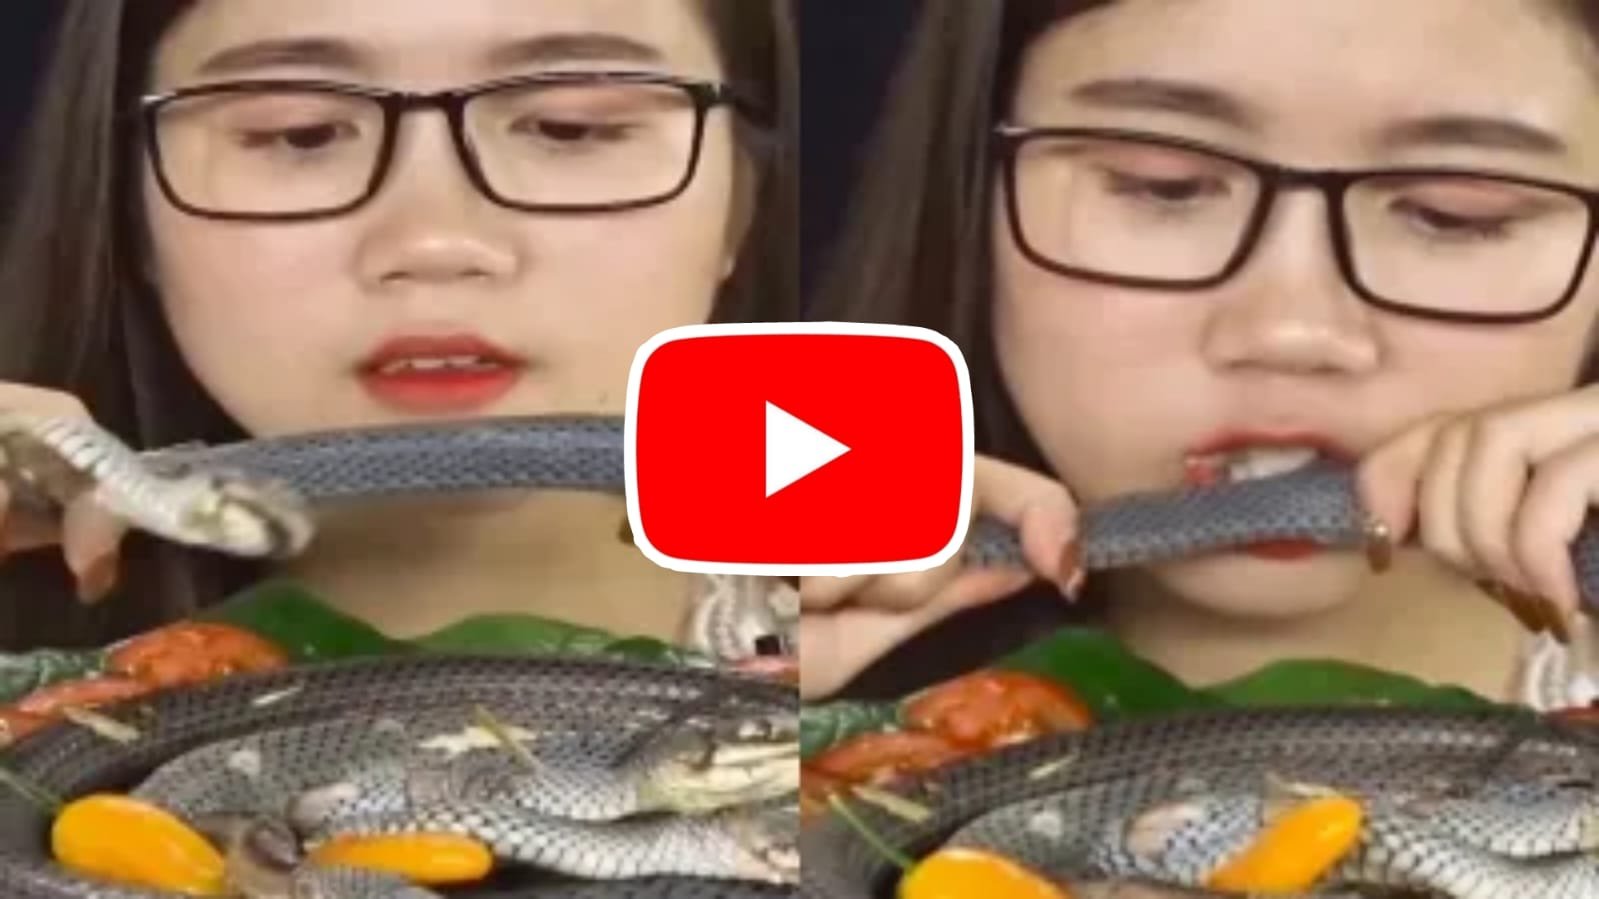 Girl and snake: This girl is very dangerous, she got eaten by a snake